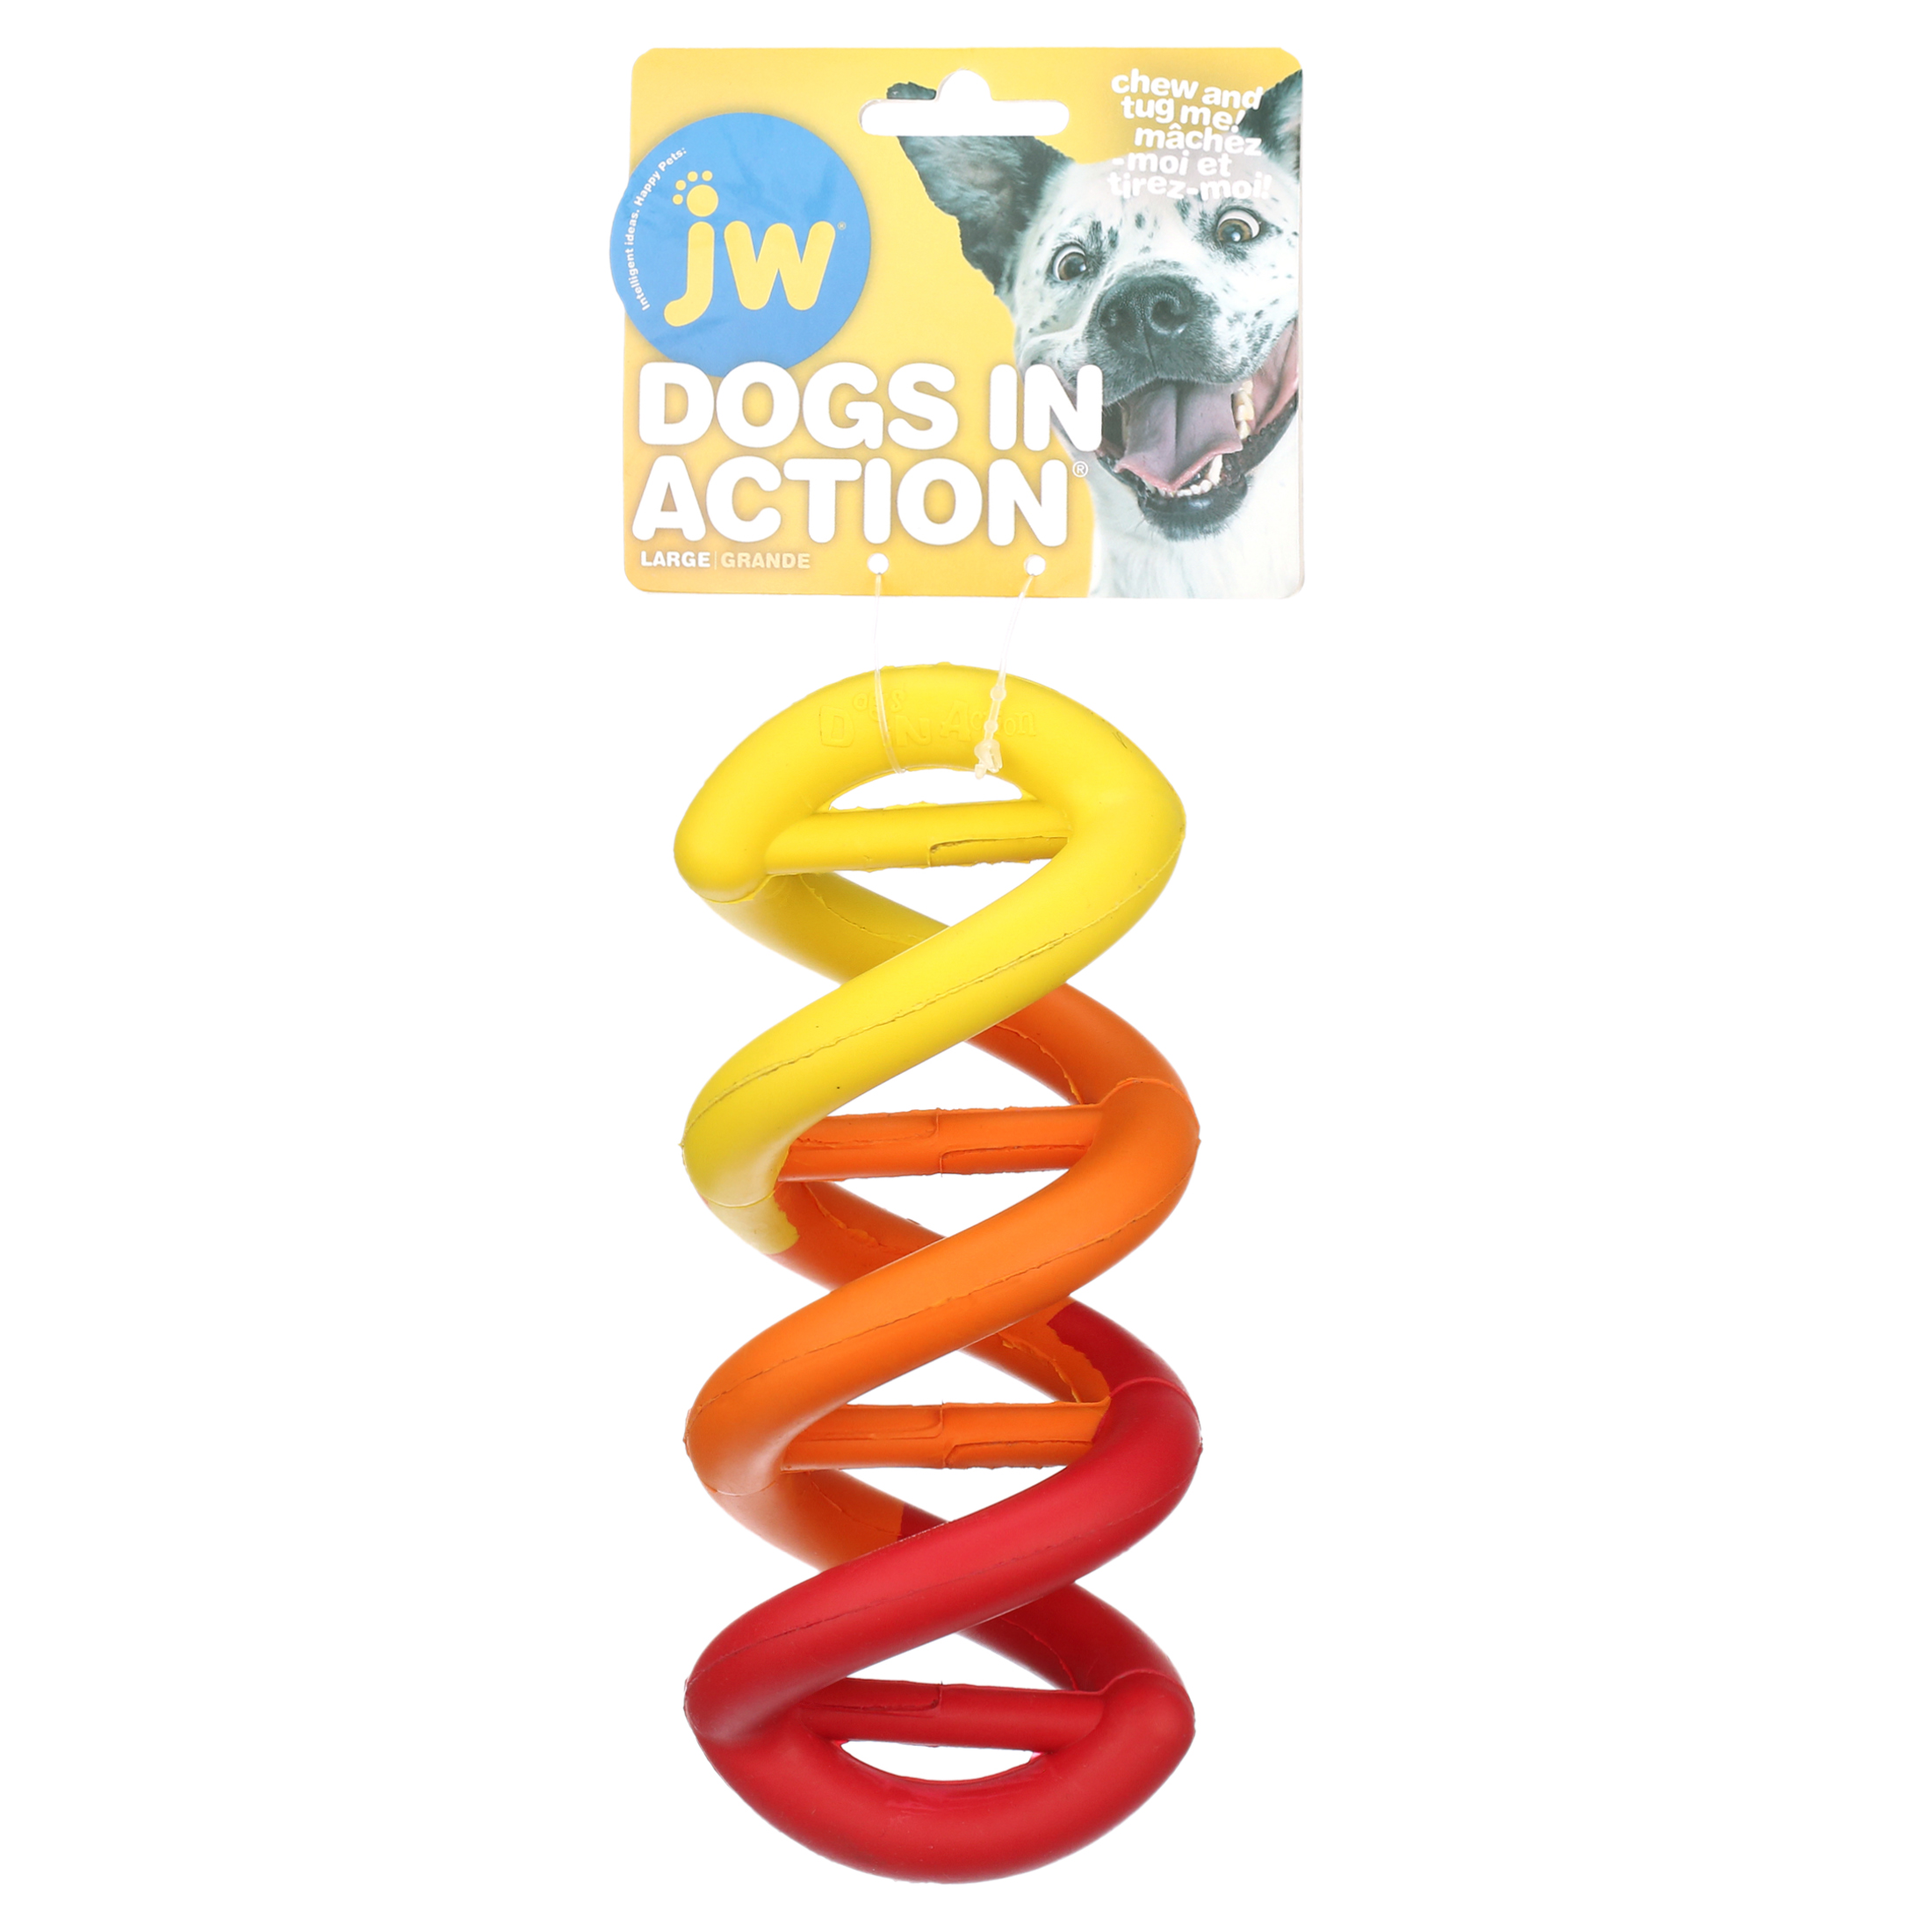 JW Dogs in Action Double Helix Shaped Rubber Chew and Tug Dog Toy, Multicolor, Large, Pack of 1 - image 2 of 5